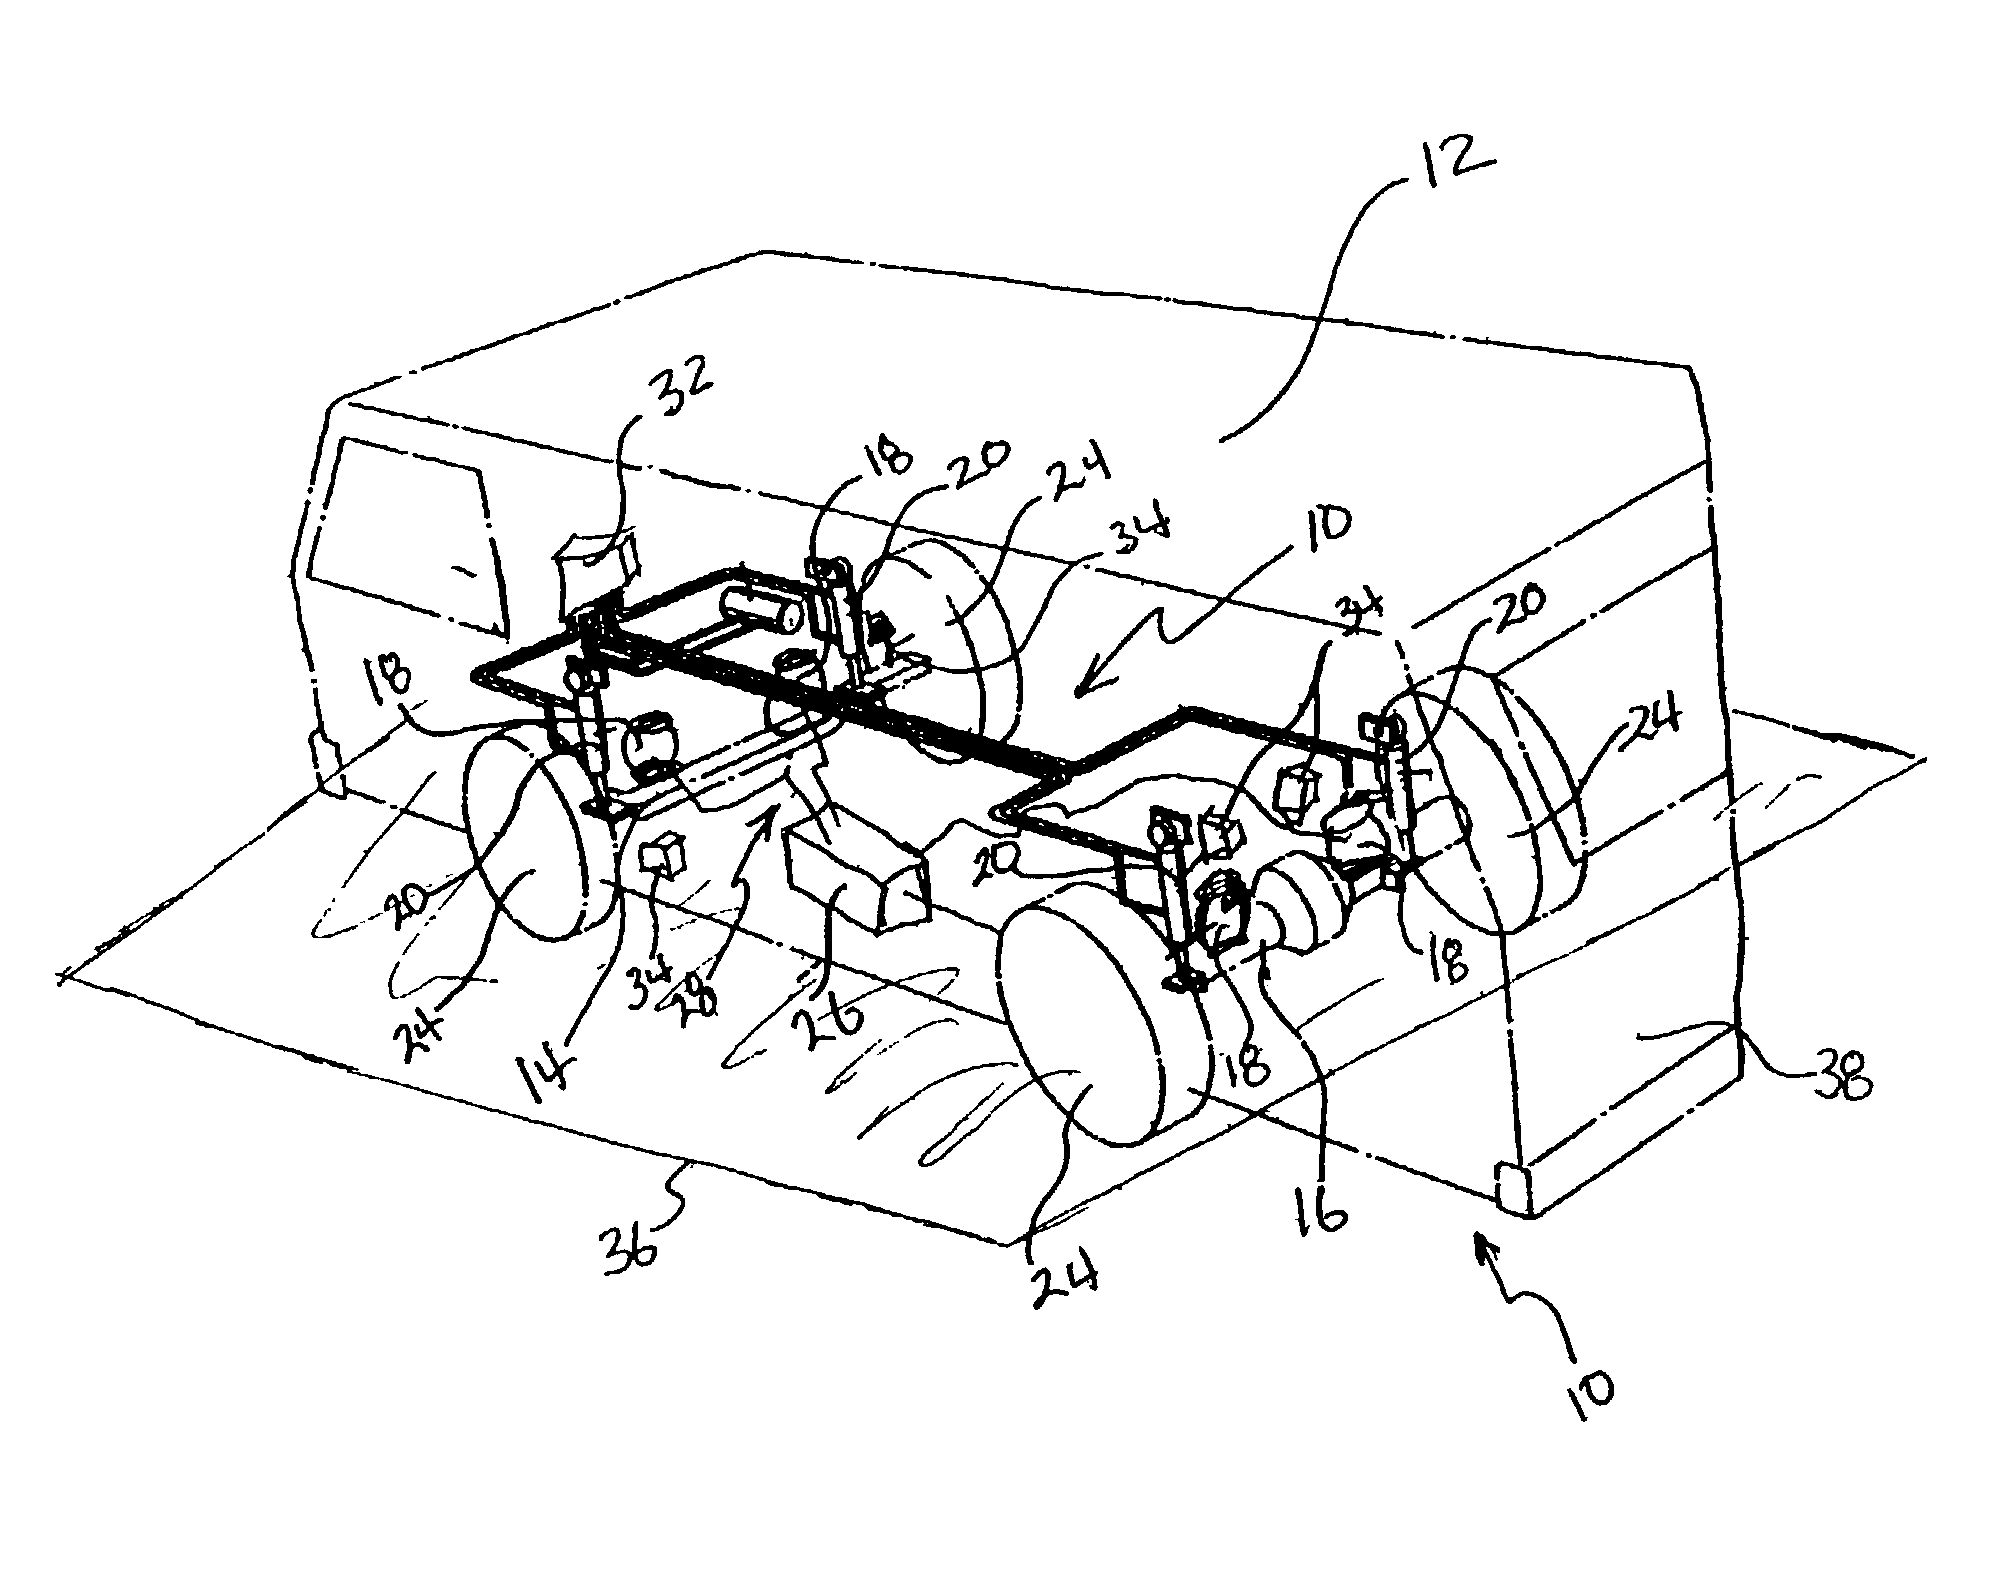 Suspension with integrated leveling and stabilization mechanisms